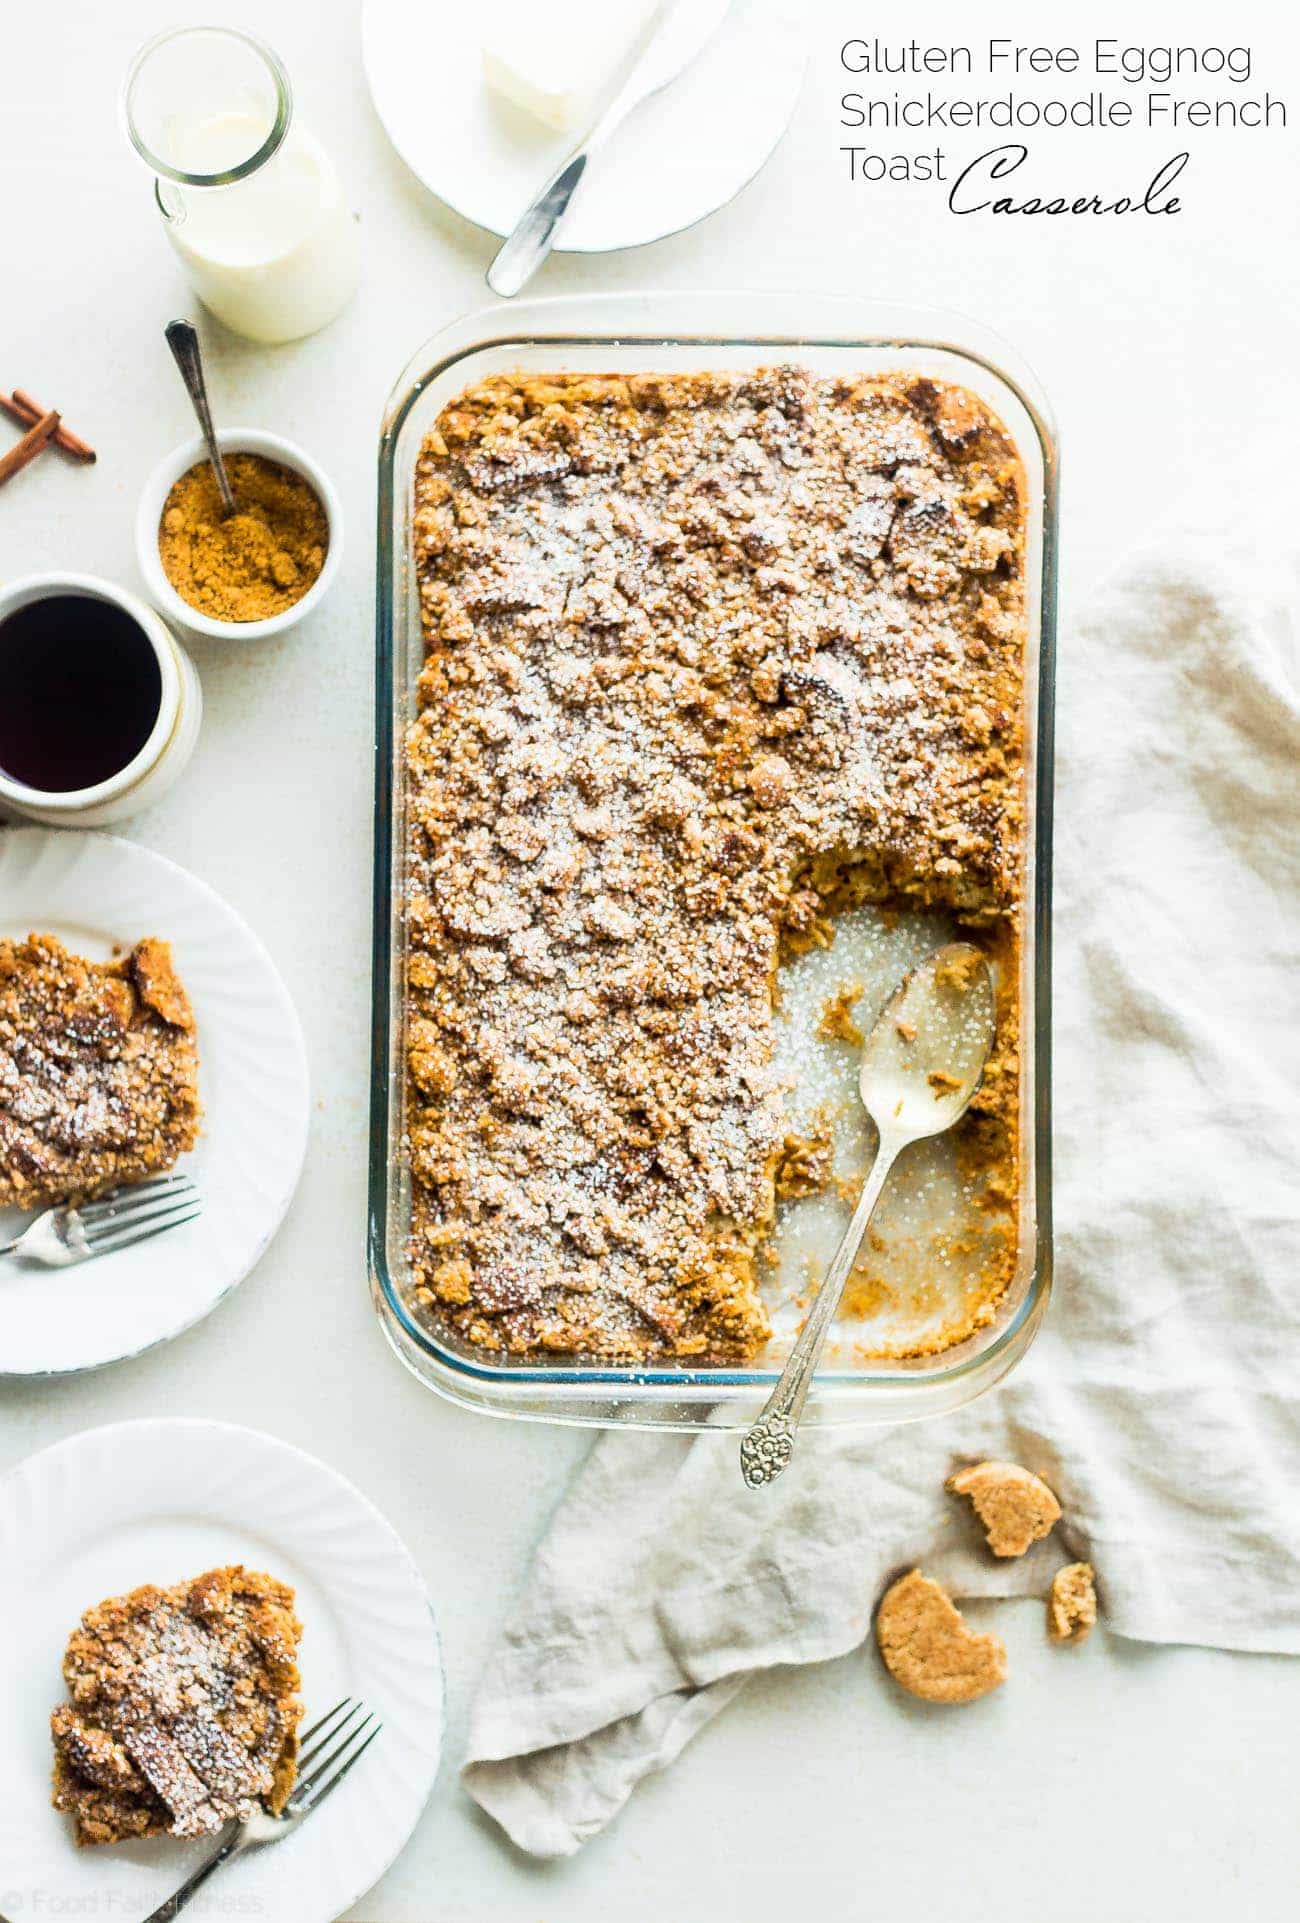 Gluten Free Overnight Eggnog Snickerdoodle Baked French Toast Casserole - Made with creamy eggnog and a snickerdoodle cookie streusel! It's the perfect make-ahead Christmas morning breakfast! | Foodfaithfitness.com | @FoodFaithFit